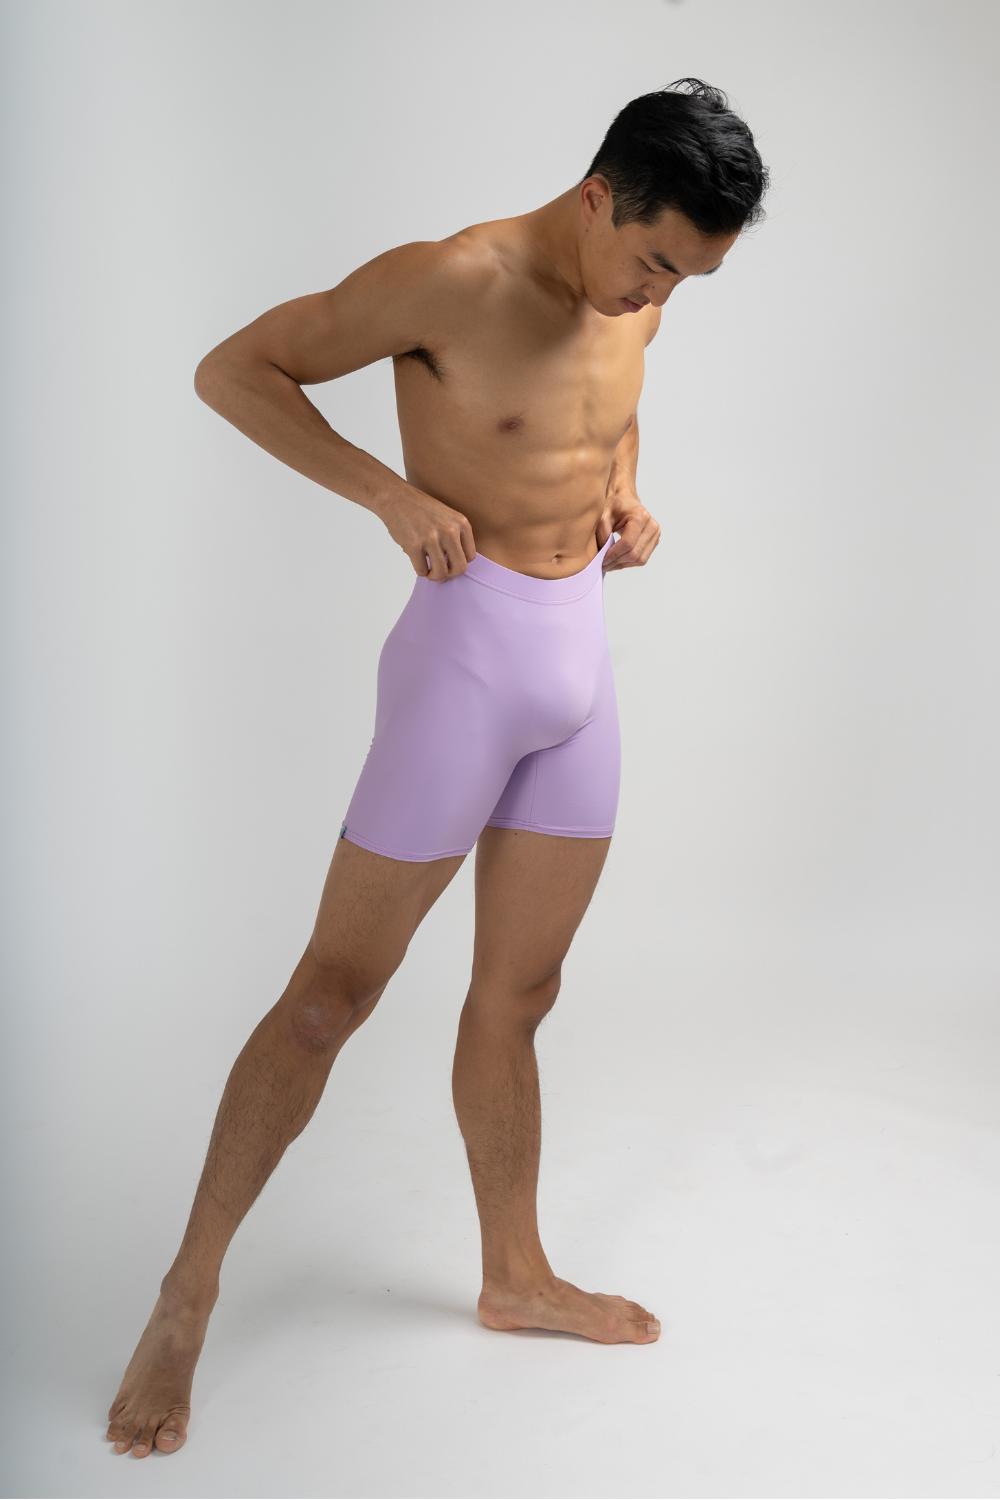 mens dance shorts in a lavender colourway. shows male ballet dancer posing in shorts 